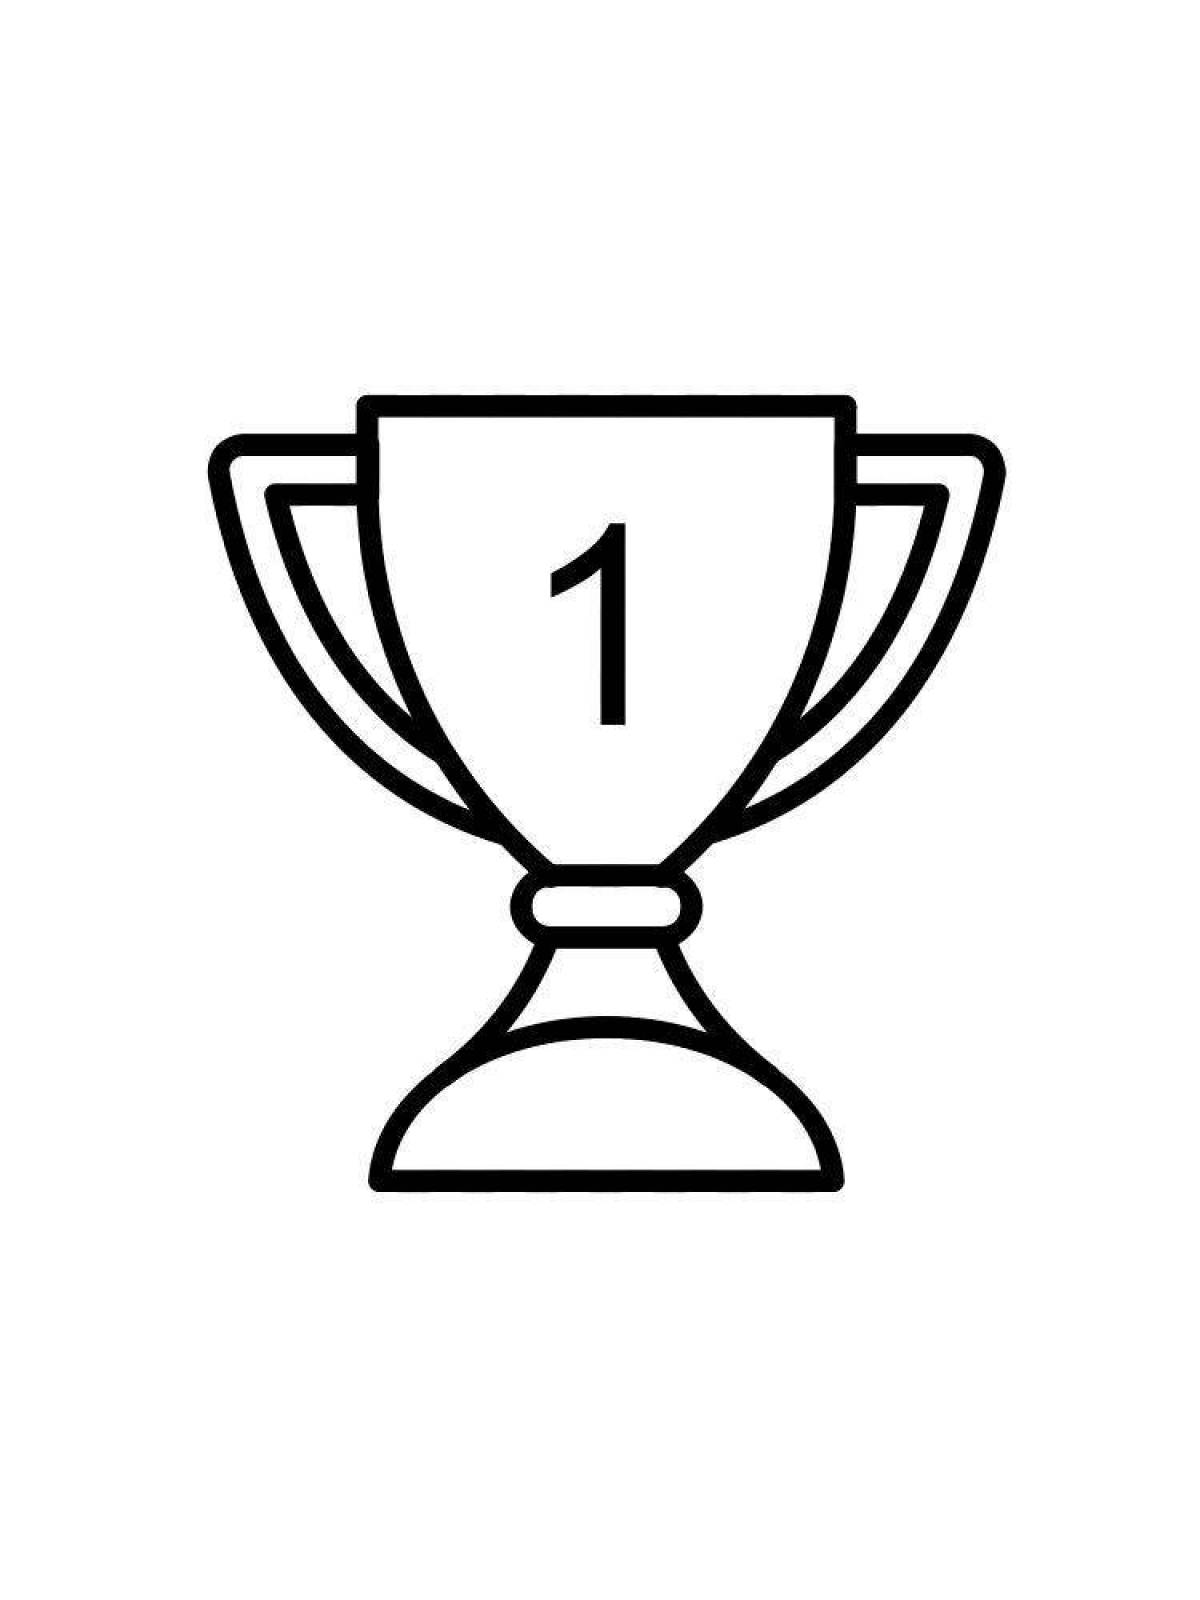 Coloring page awesome winner cup